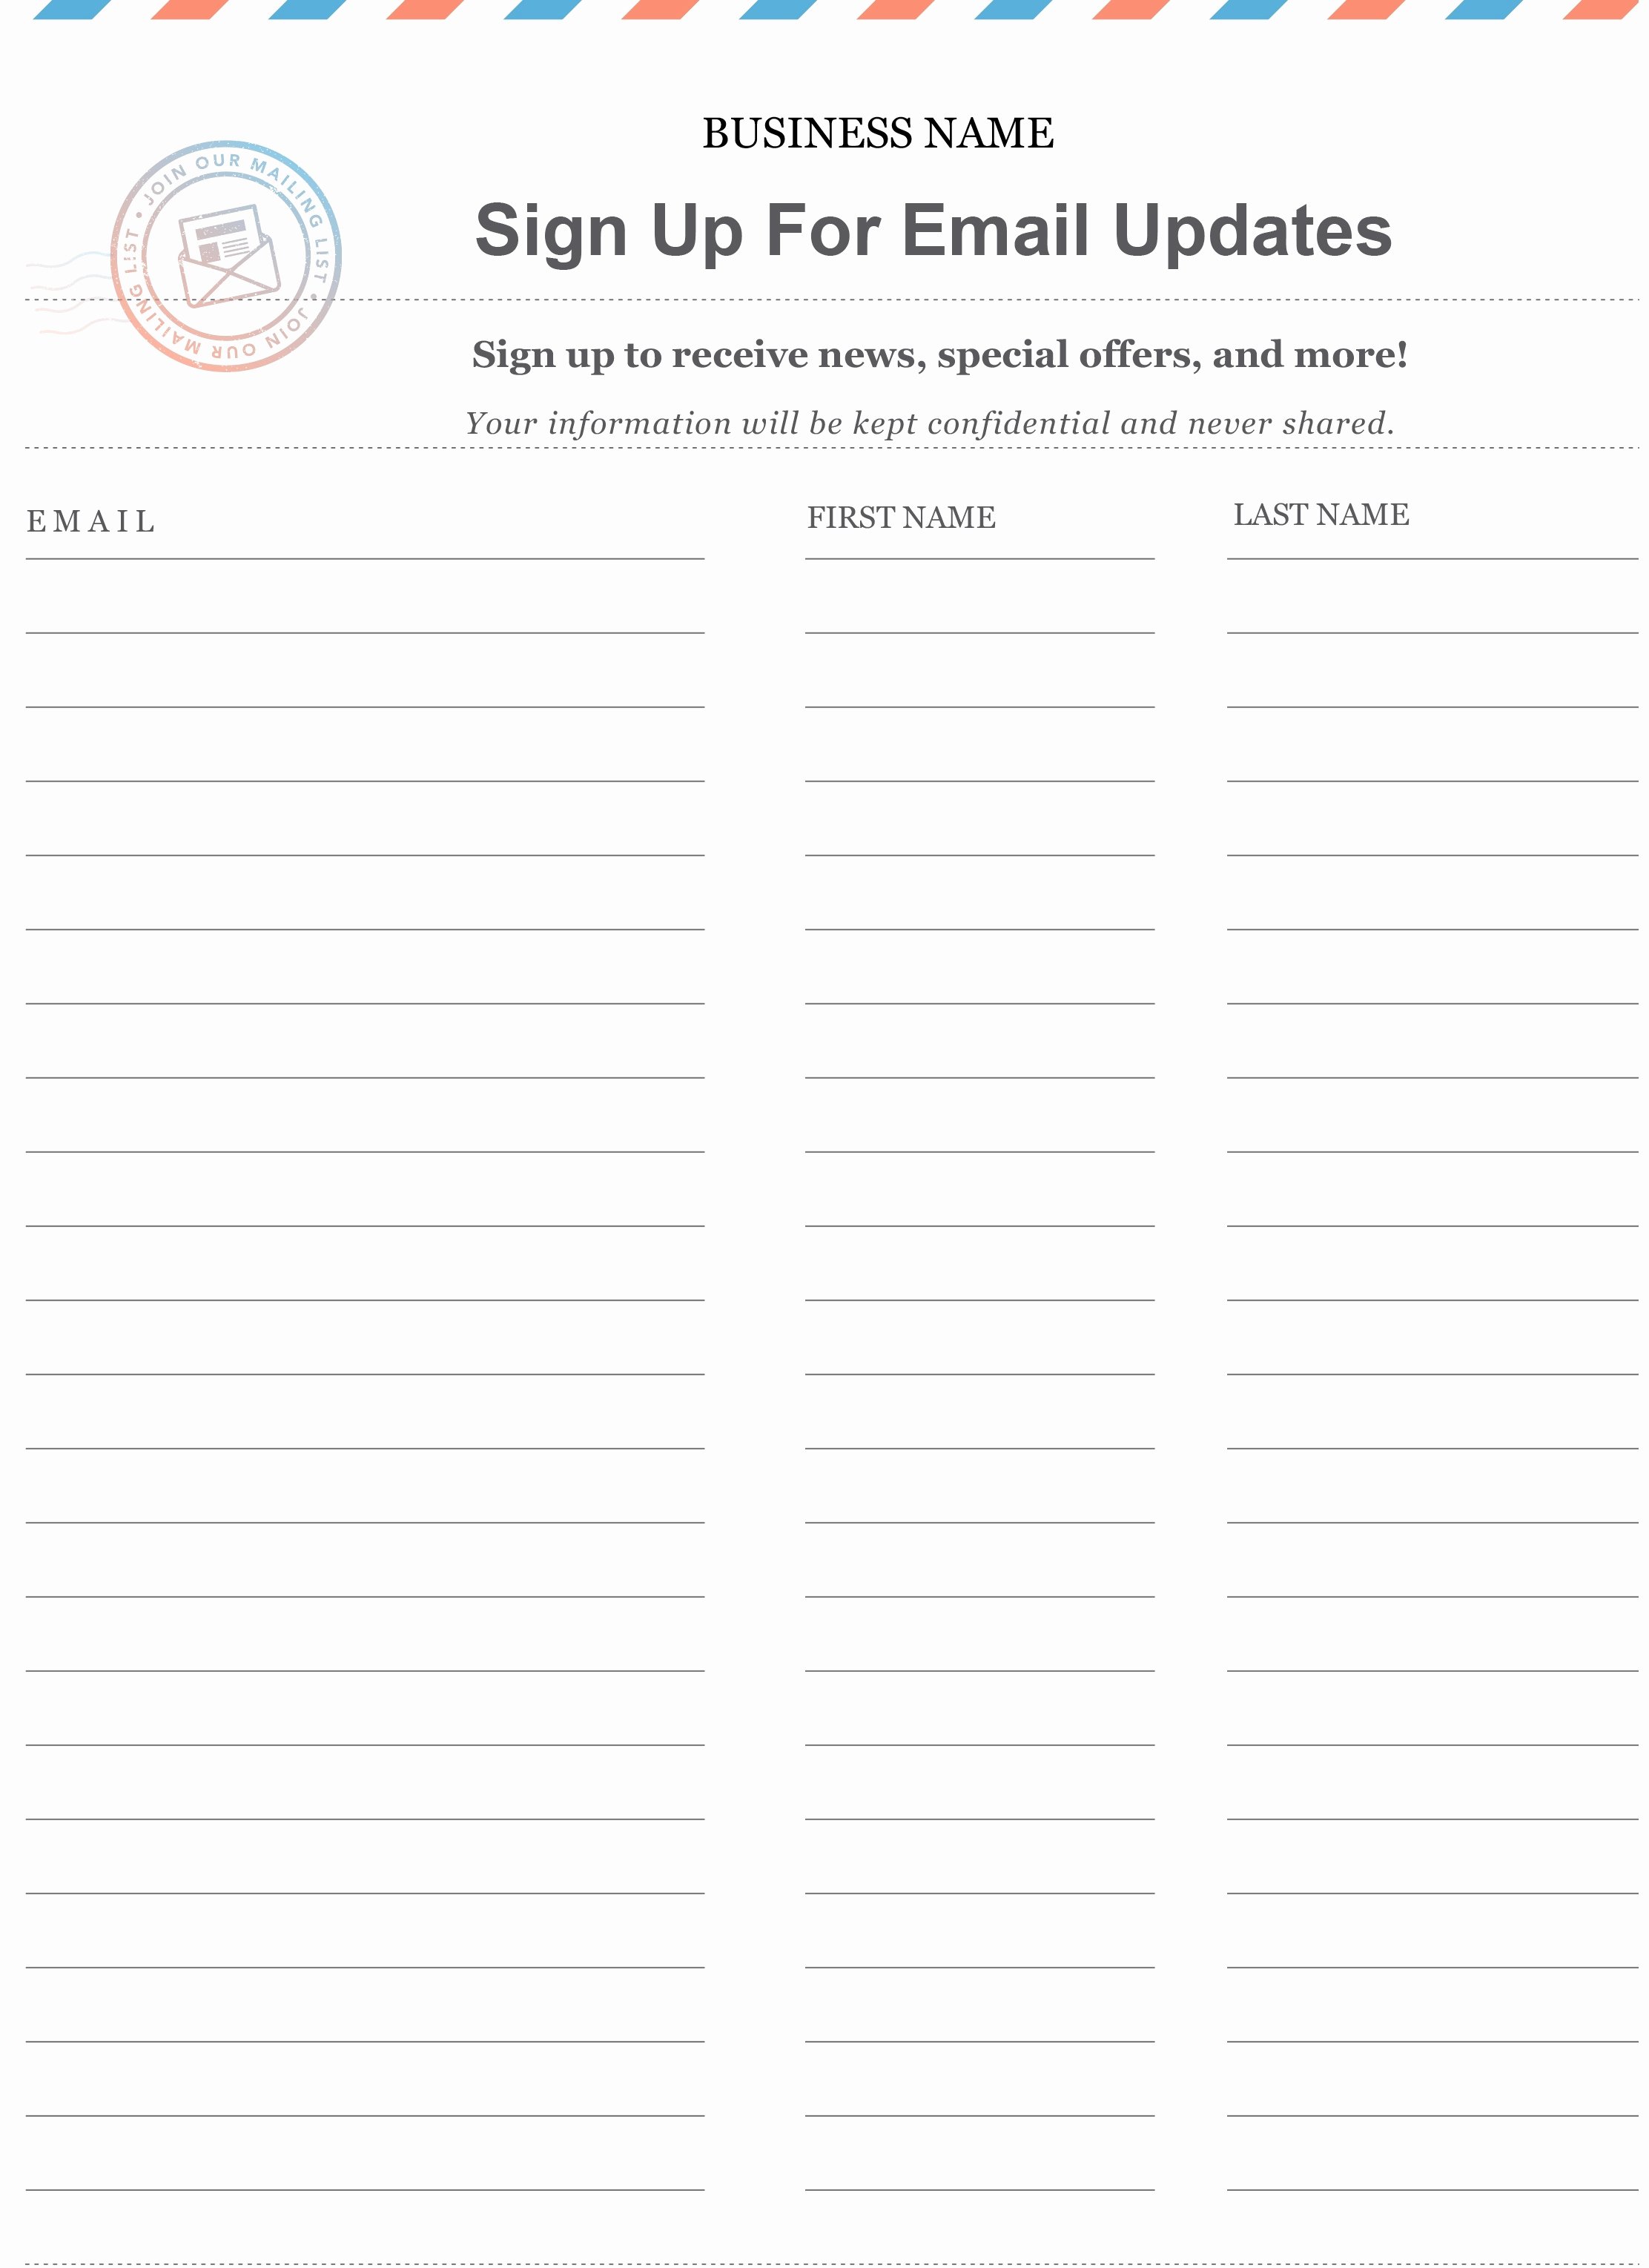 Email Signup Sheet Template Luxury Name and Email Sign Up Sheet Portablegasgrillweber